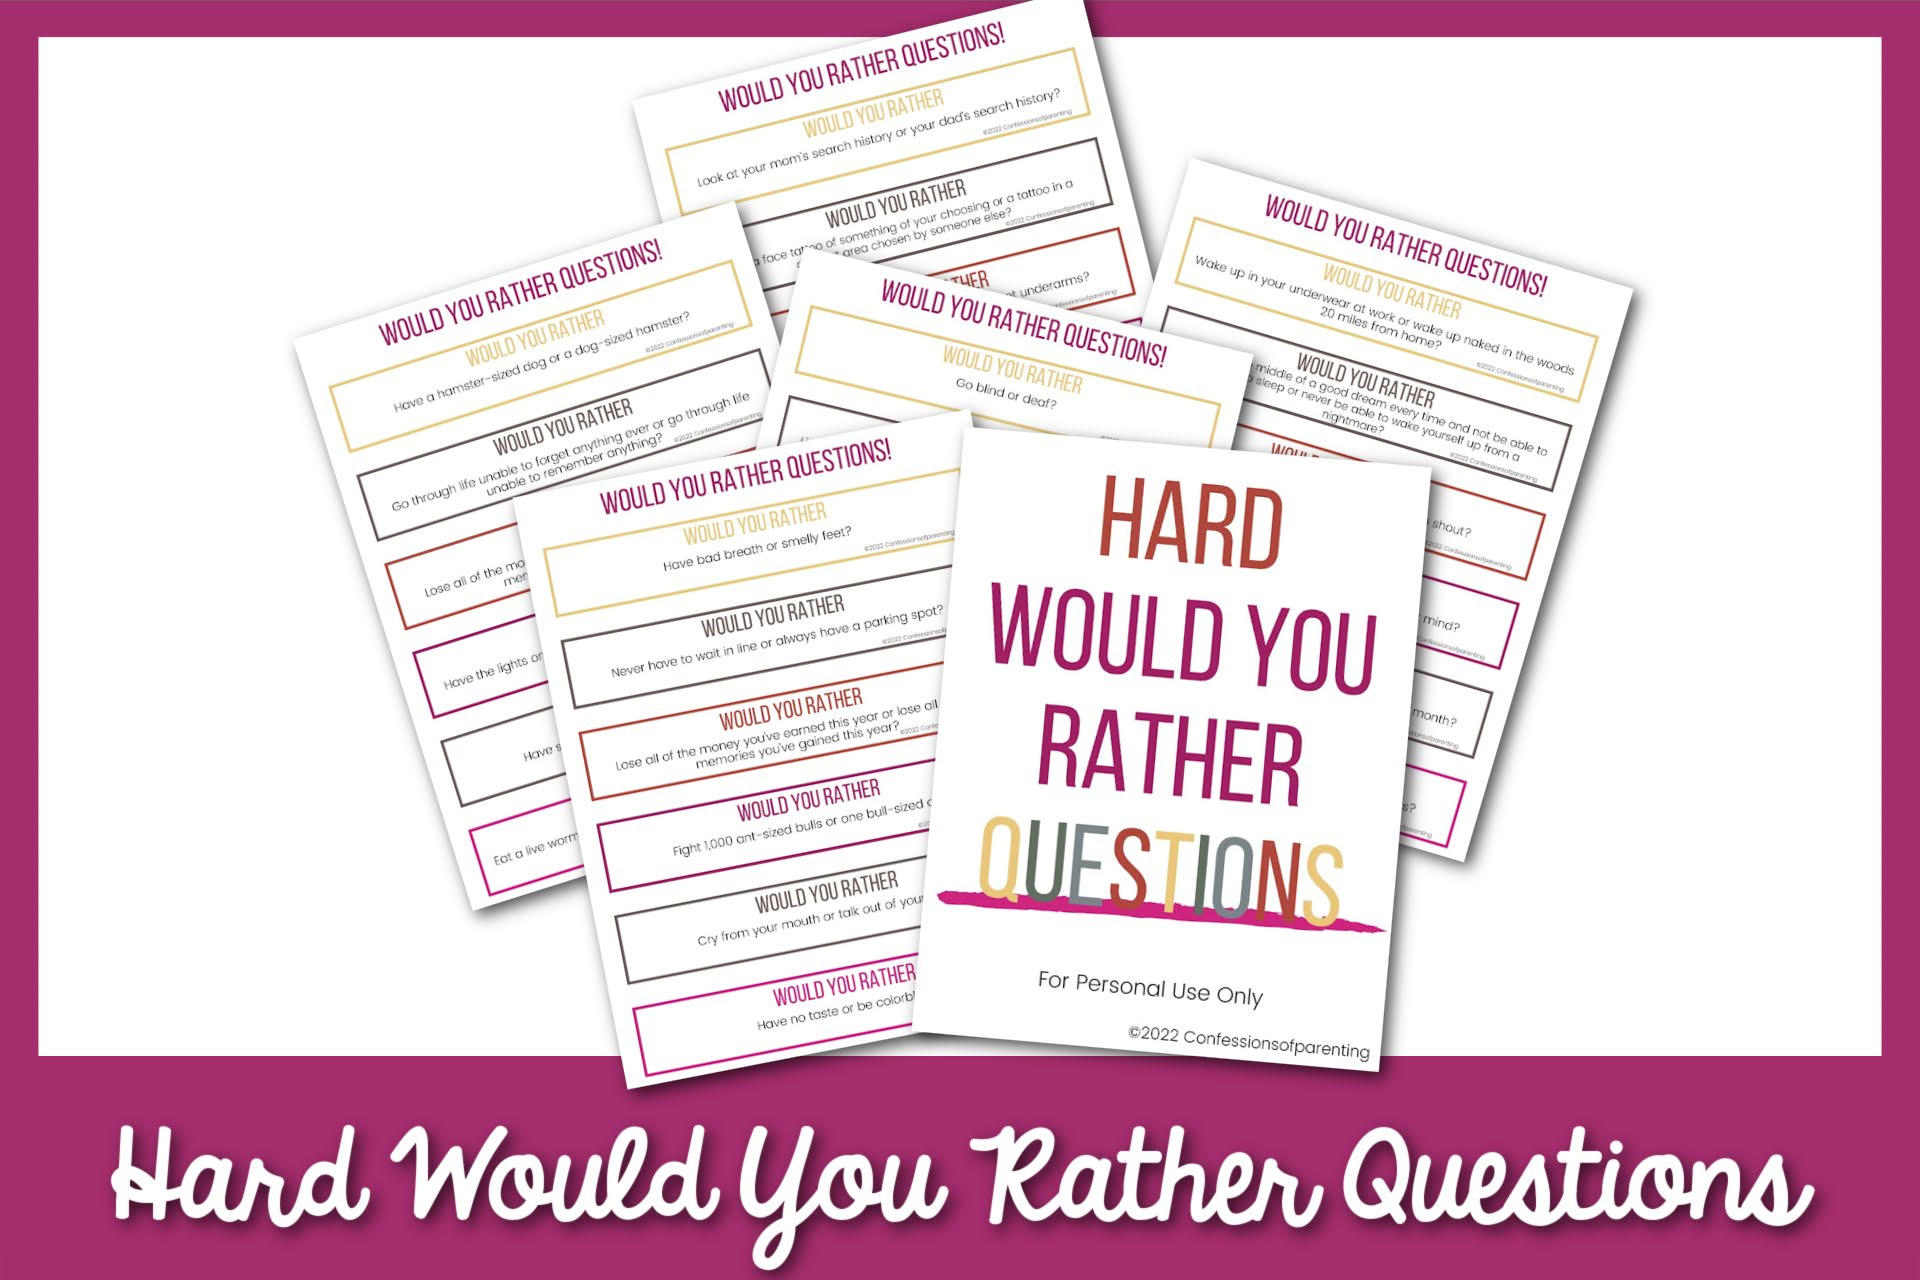 featured image: hard would you rather questions on a pink border